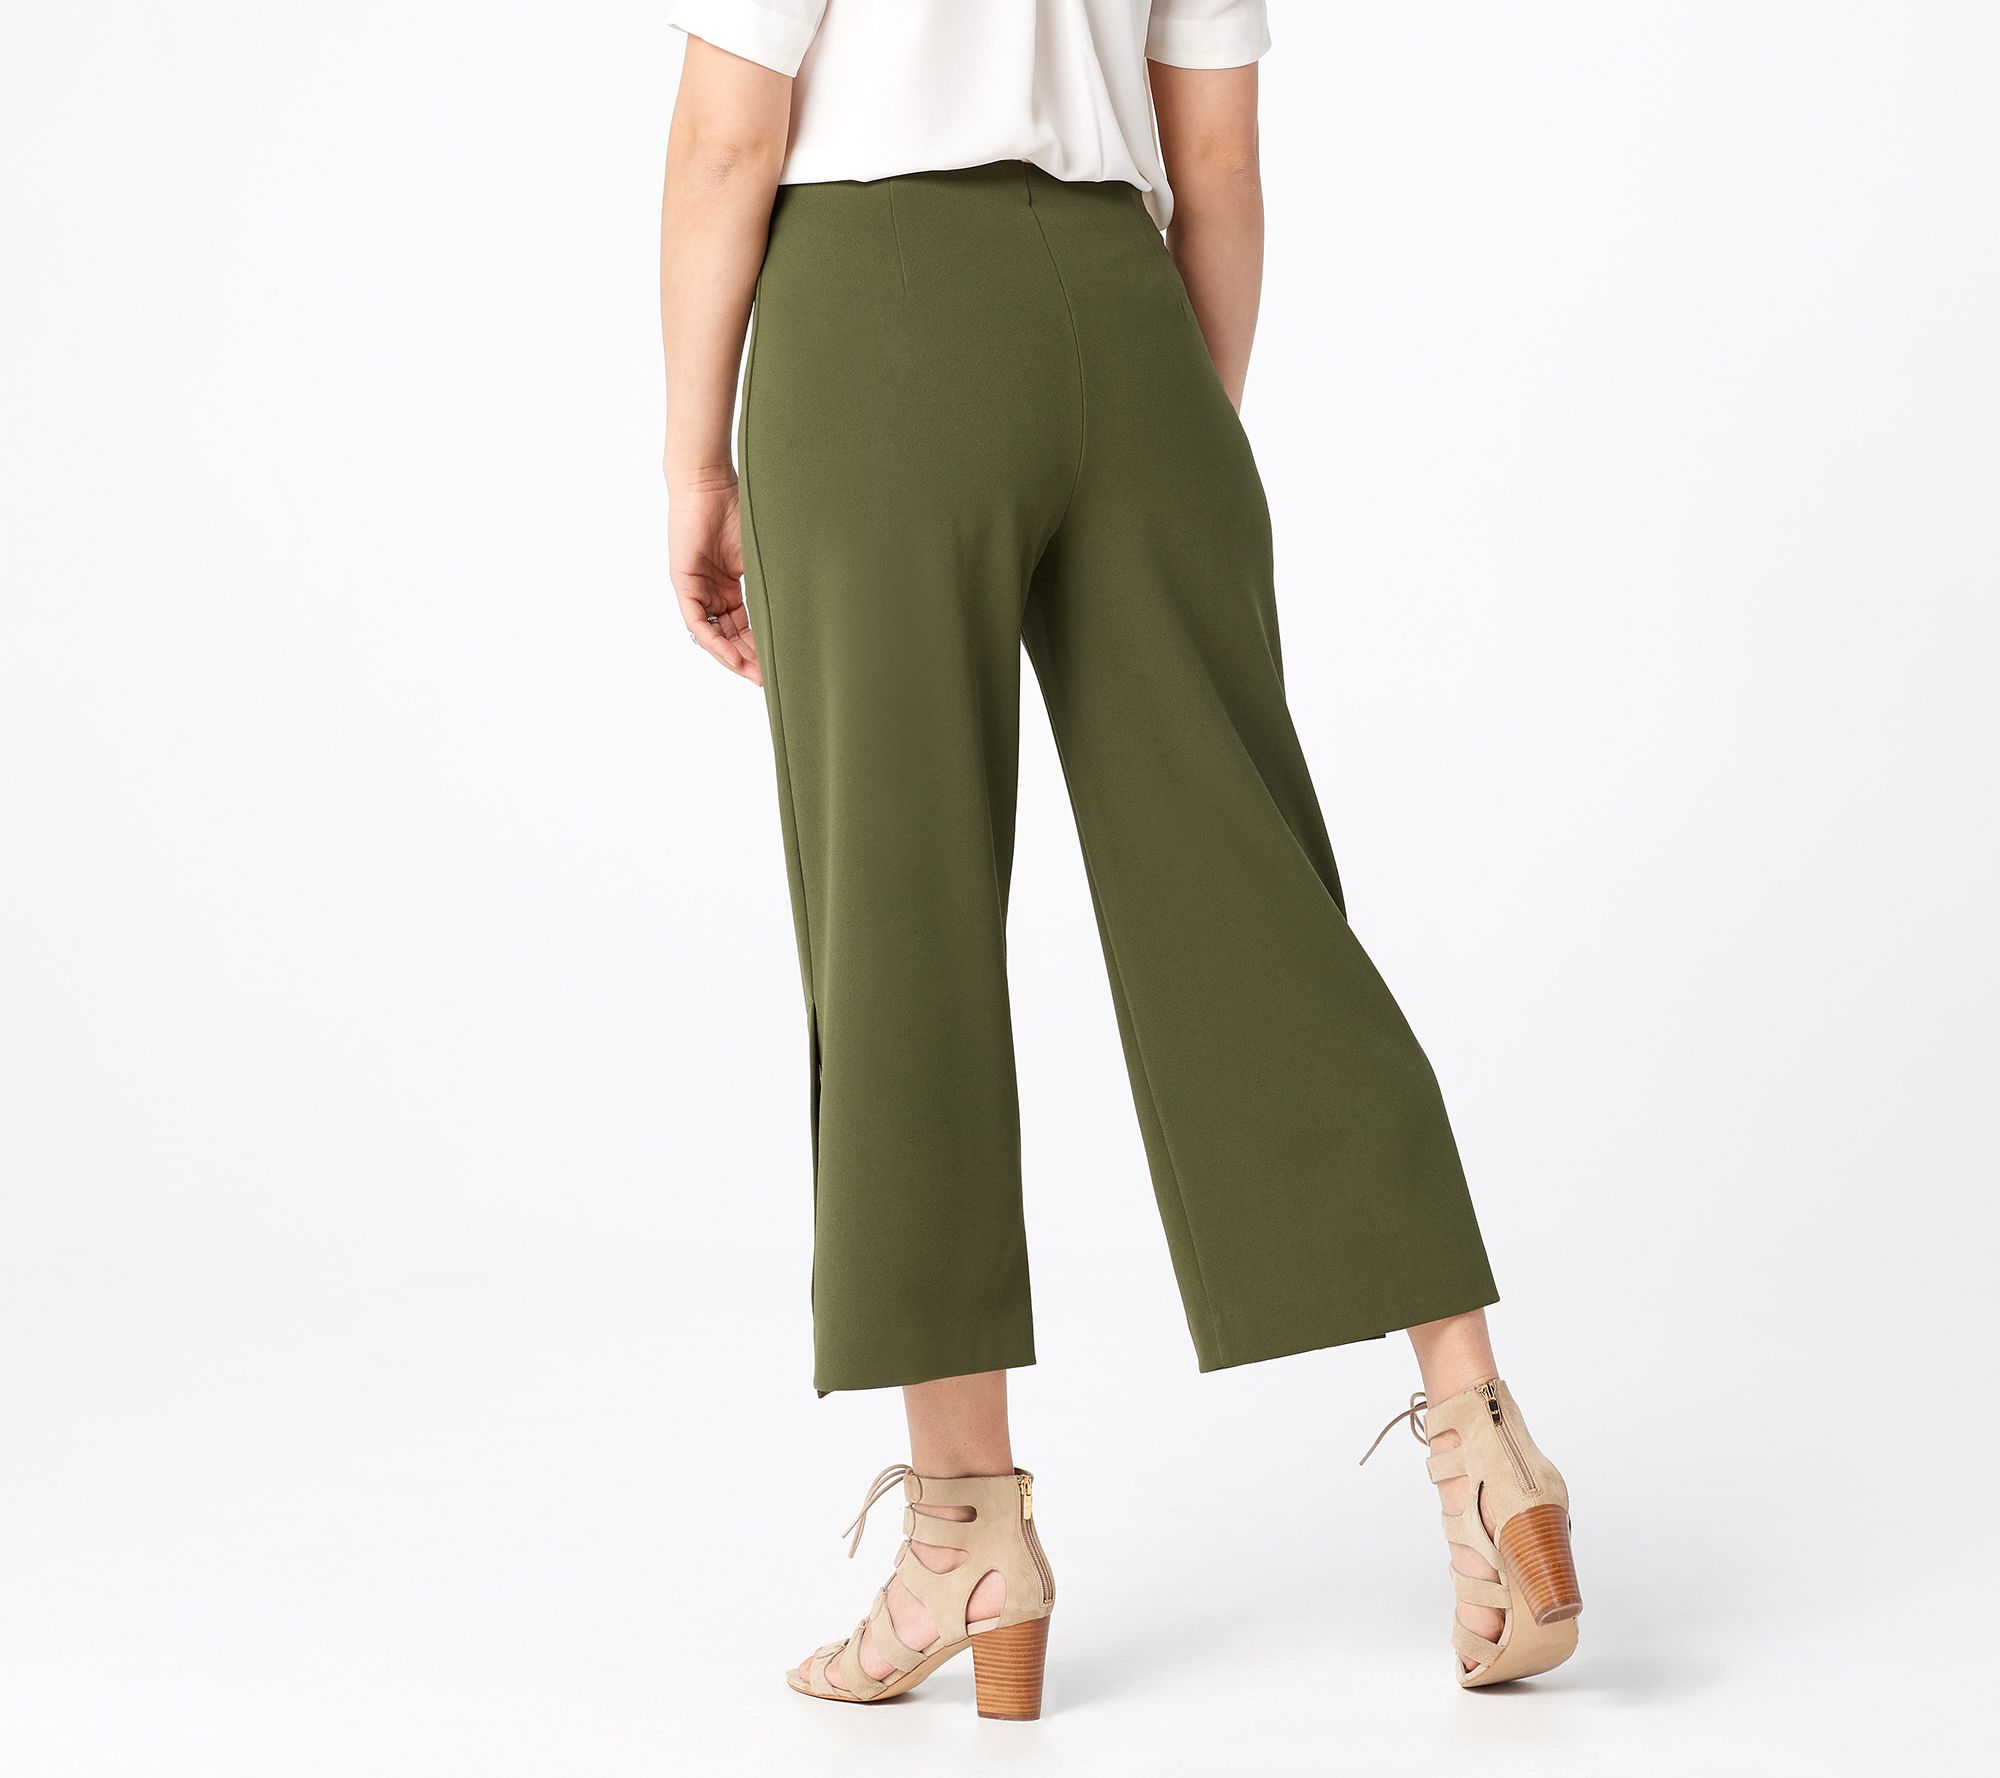 Dennis Basso Luxe Crepe Pull-On Crop Pants with Grommets - QVC.com